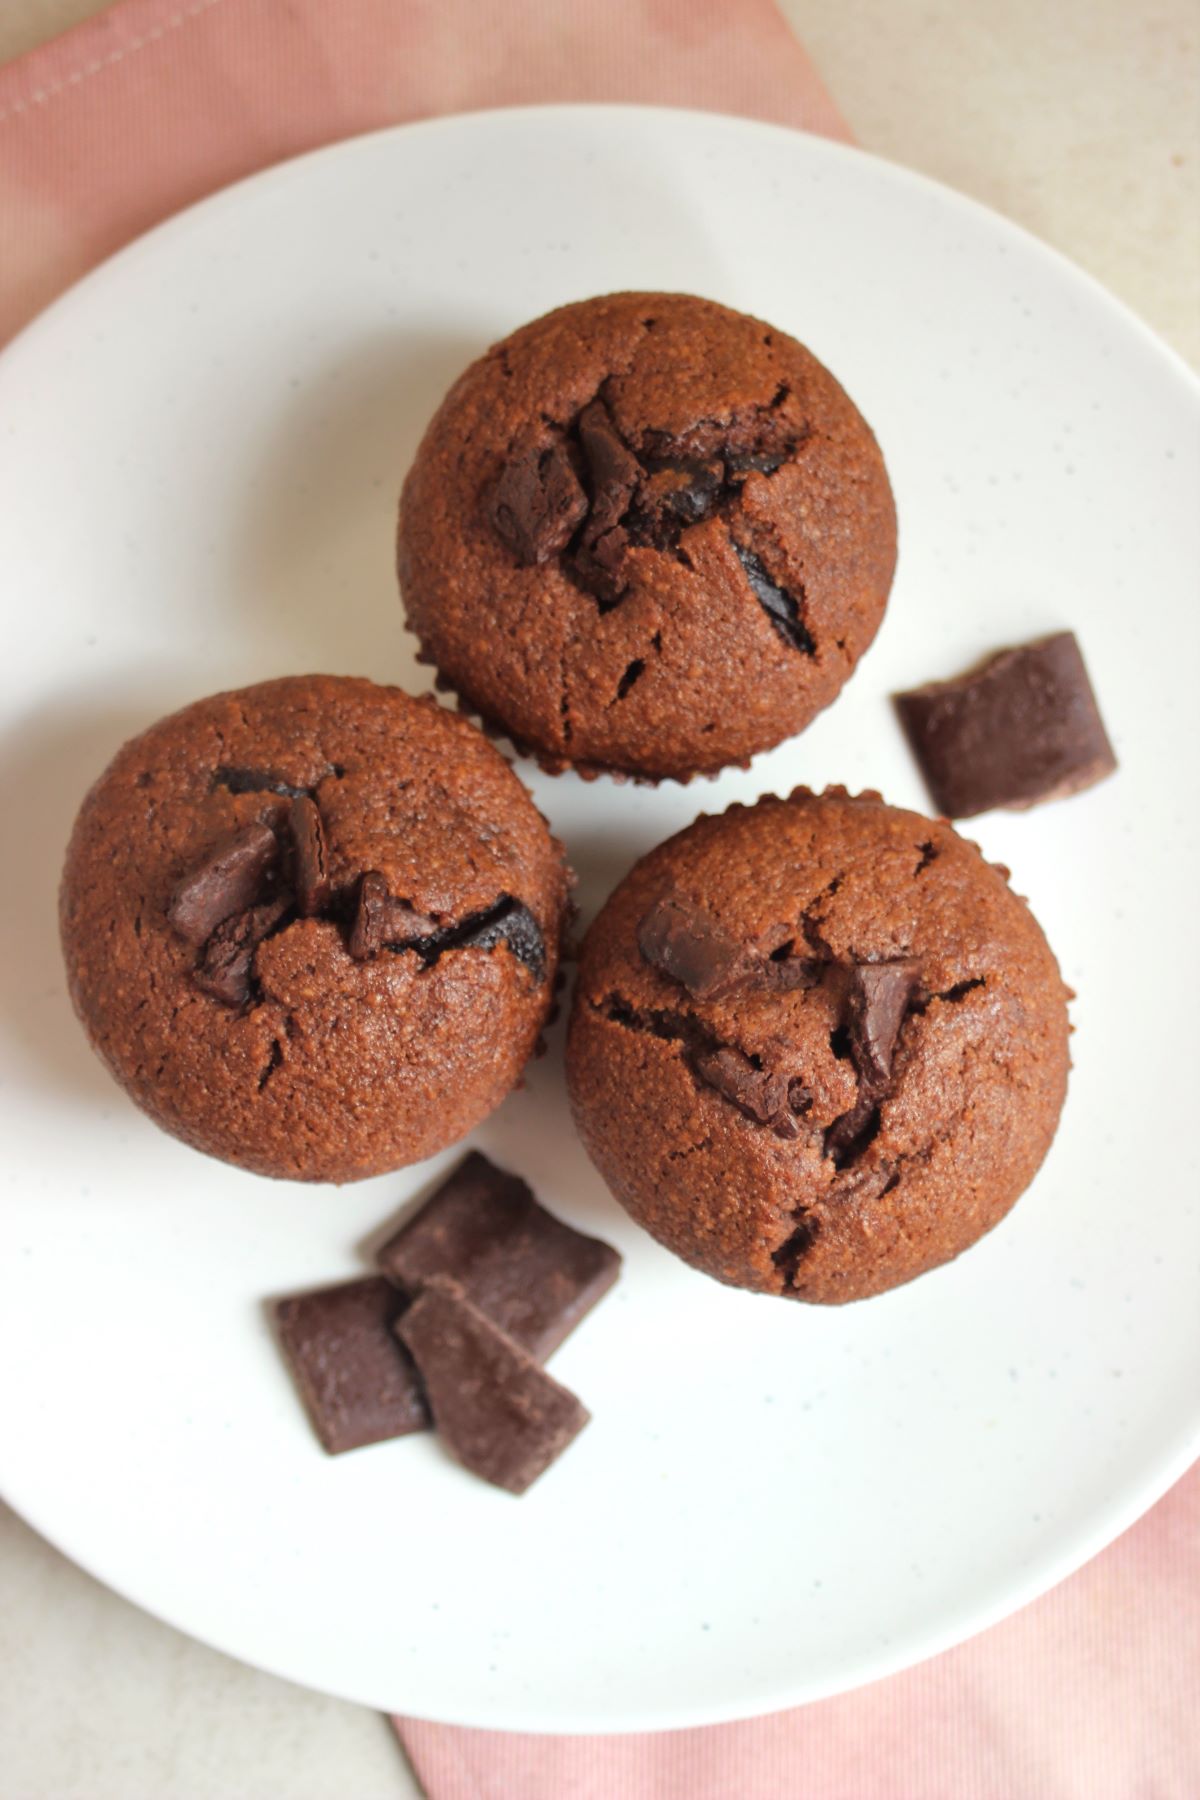 Three banana chocolate muffins on a white plate seen from above. Chocolate chunks on the side.